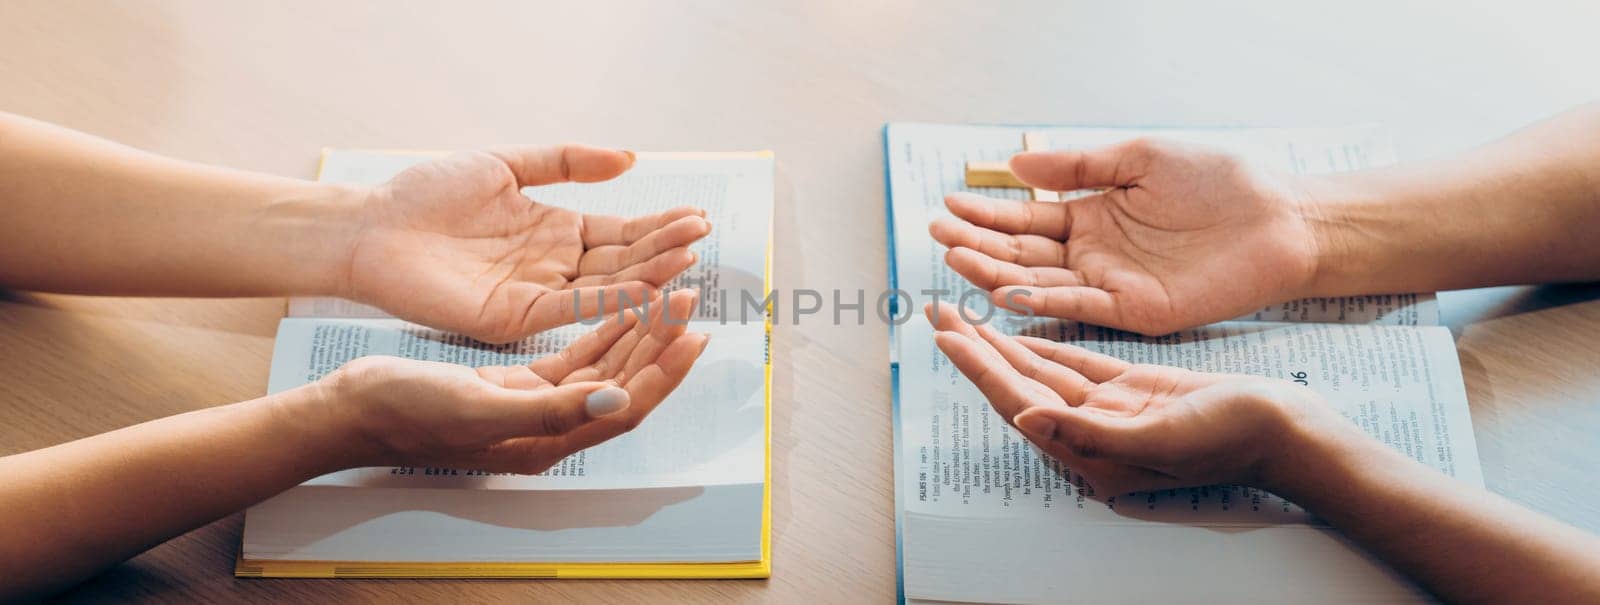 Two believer praying together on holy bible book faithfully with wooden cross placed at wooden church. Concept of hope, religion, faith, christianity and god blessing. Facing hand. Burgeoning.